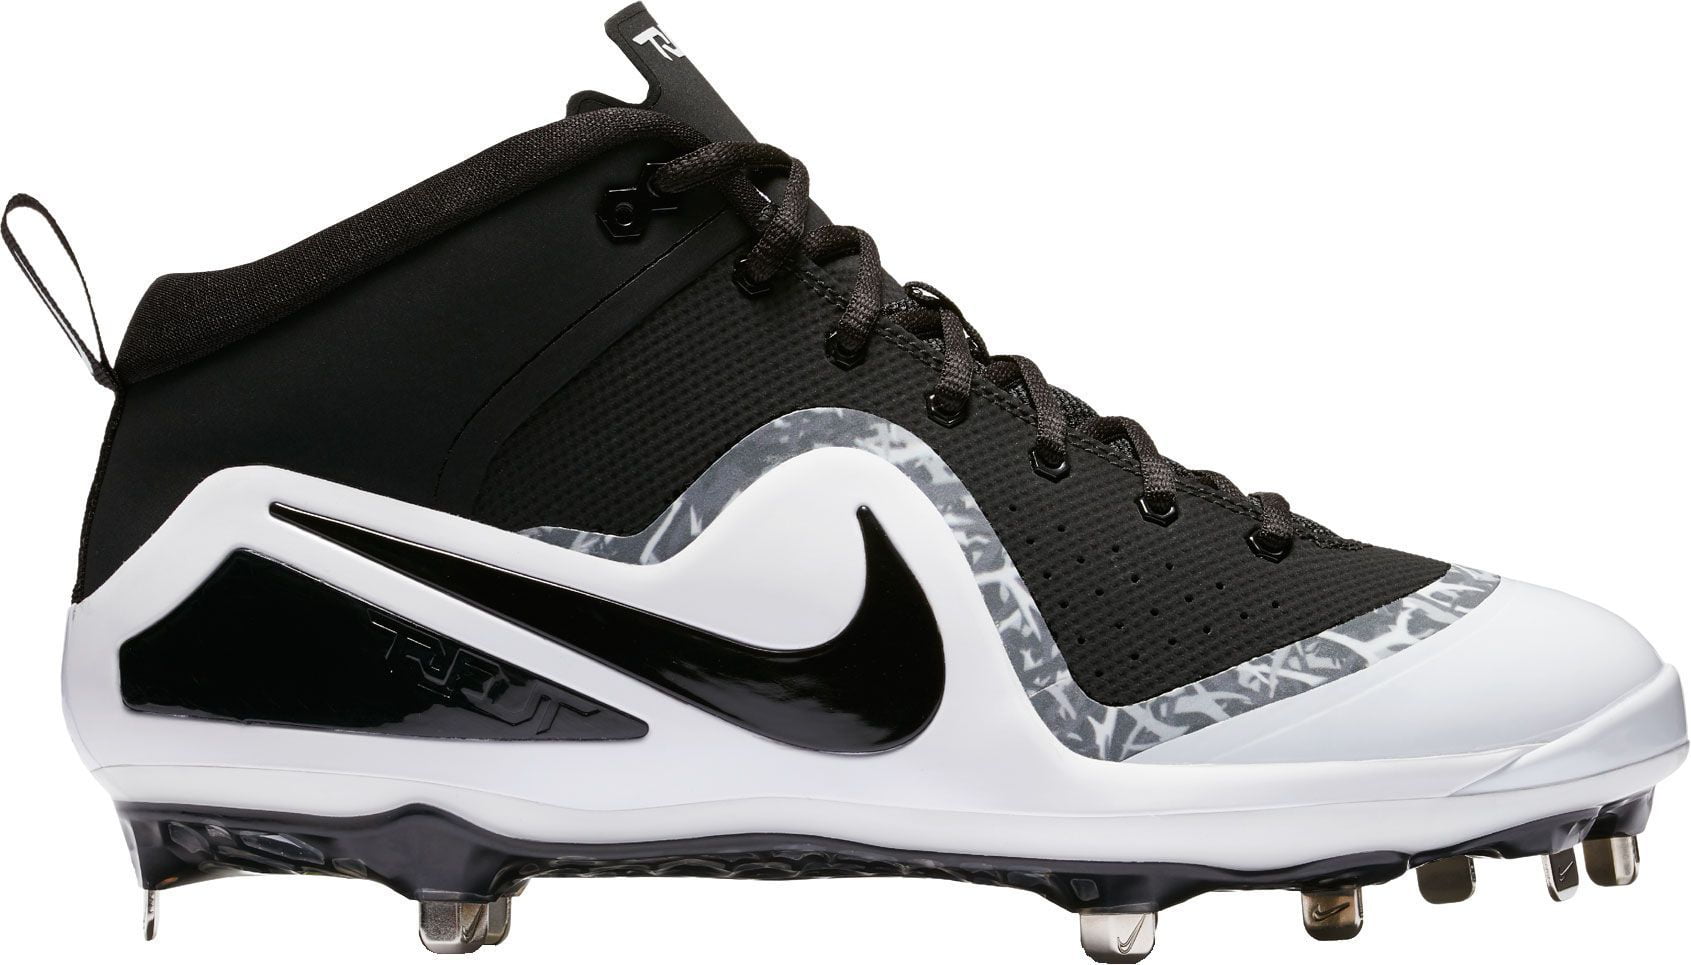 Nike Men's Force Zoom Trout 4 Mid Metal Baseball Cleats, Black/White